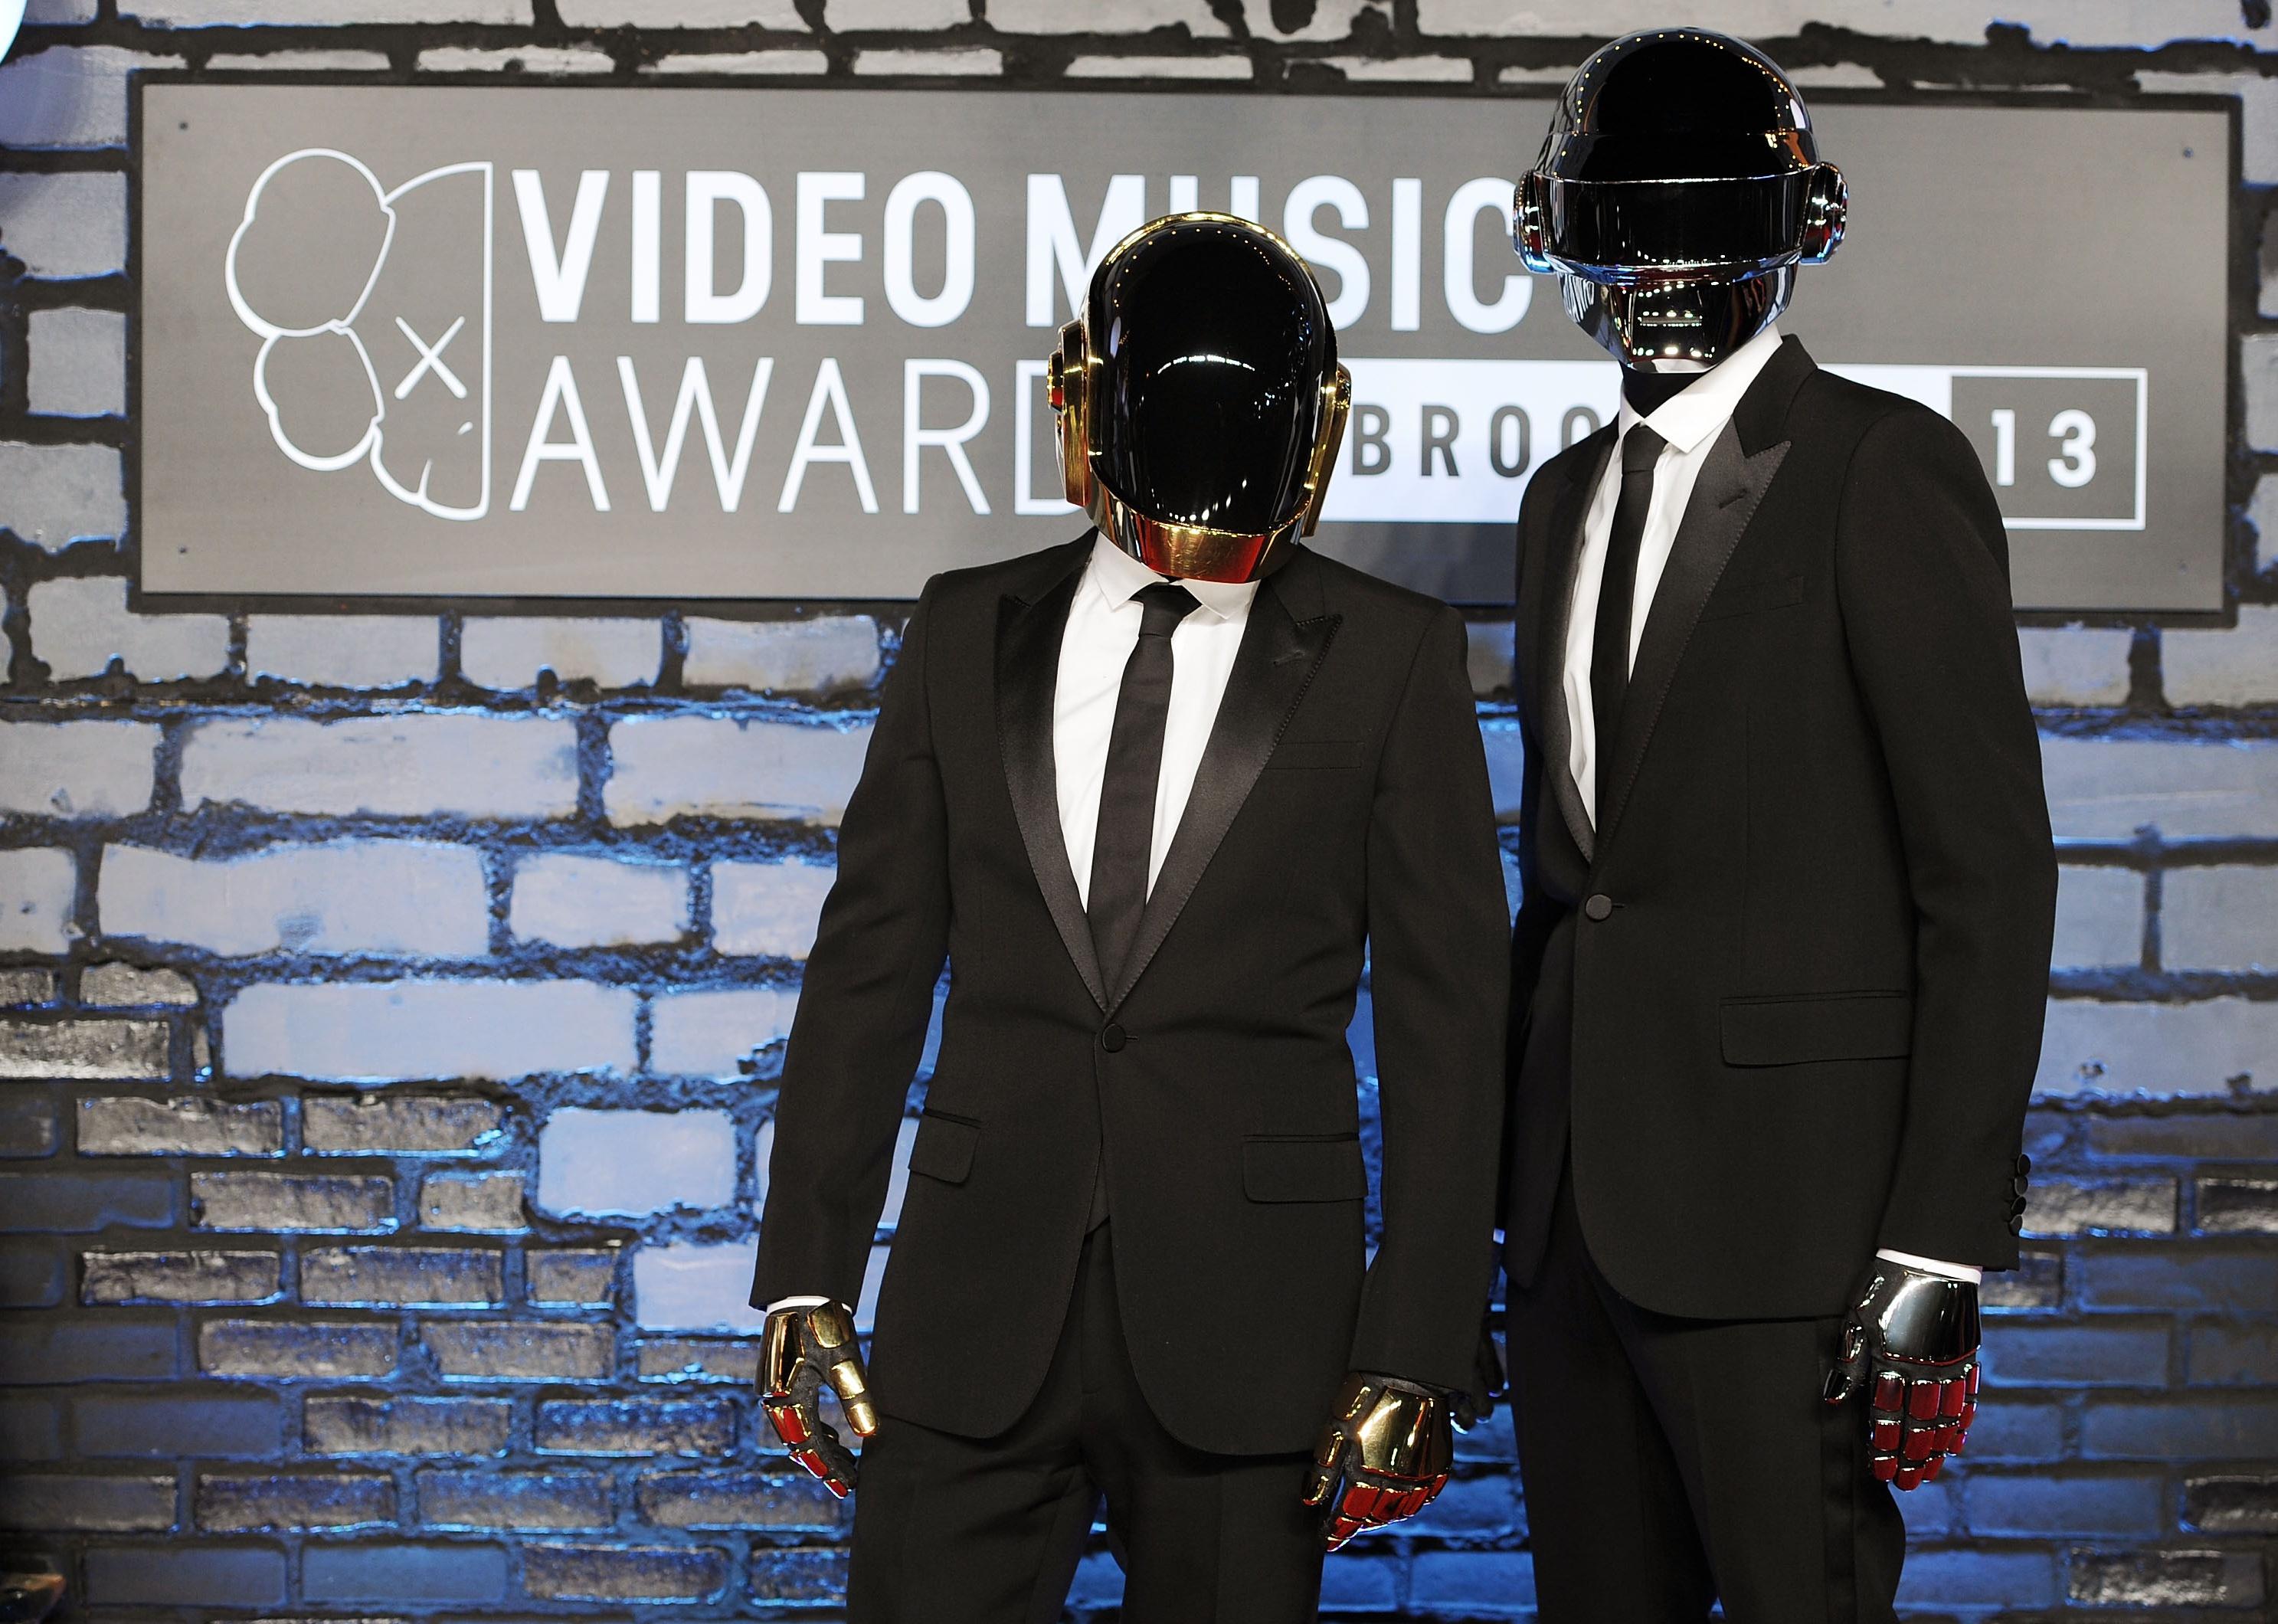 Daft Punk at the MTV Video Music Awards in 2013.